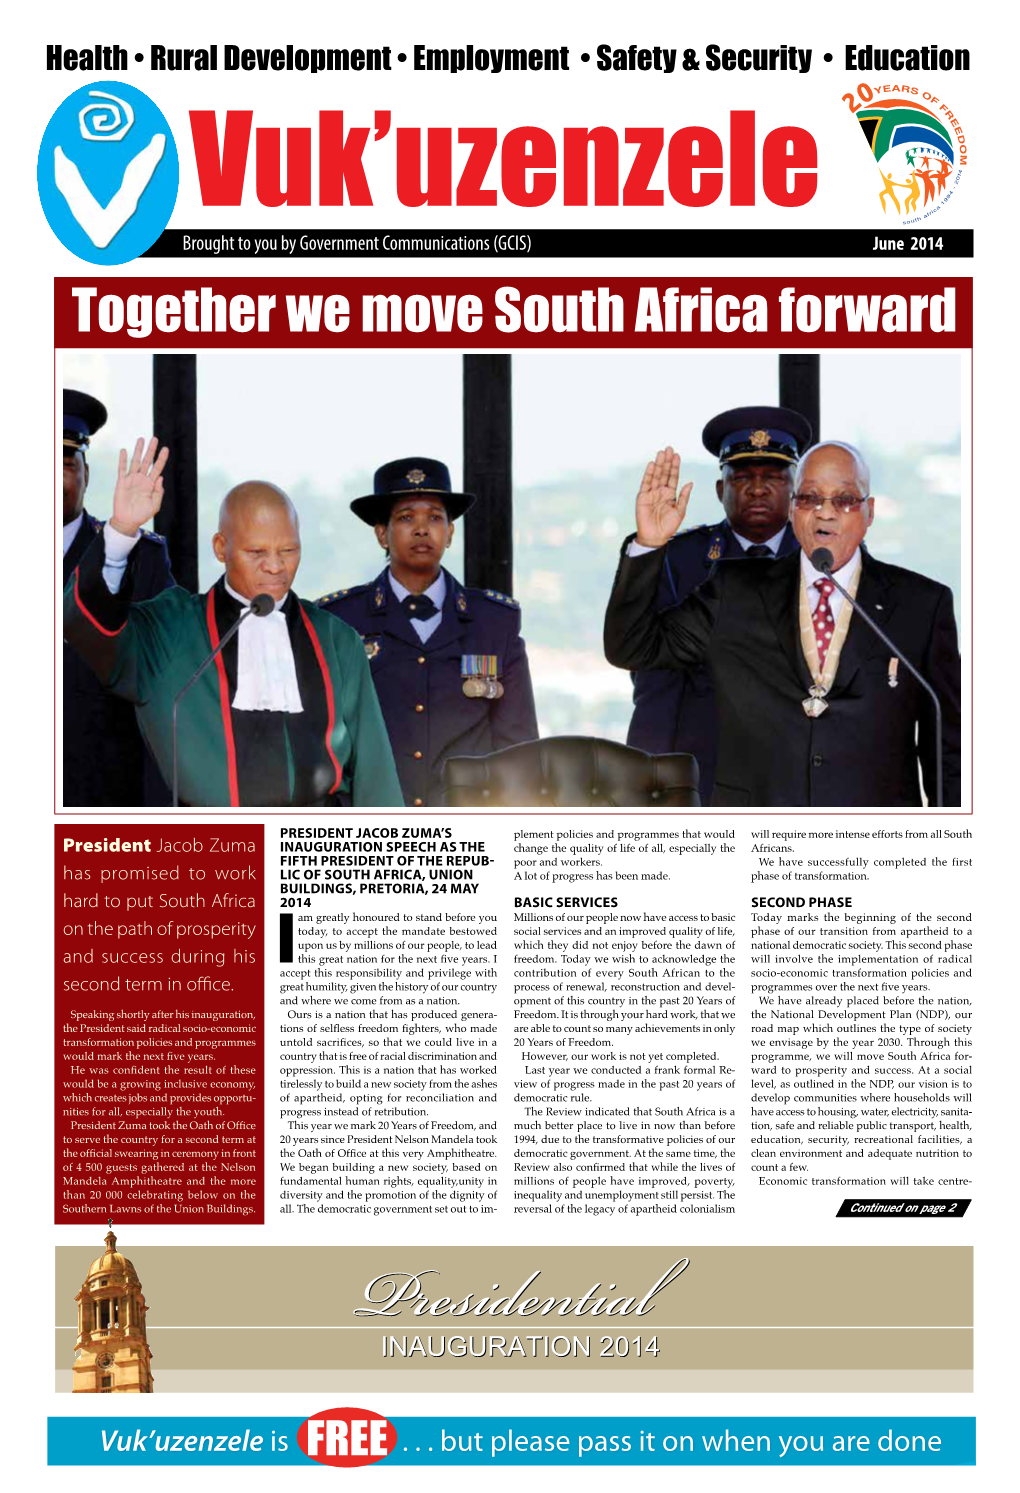 Together We Move South Africa Forward